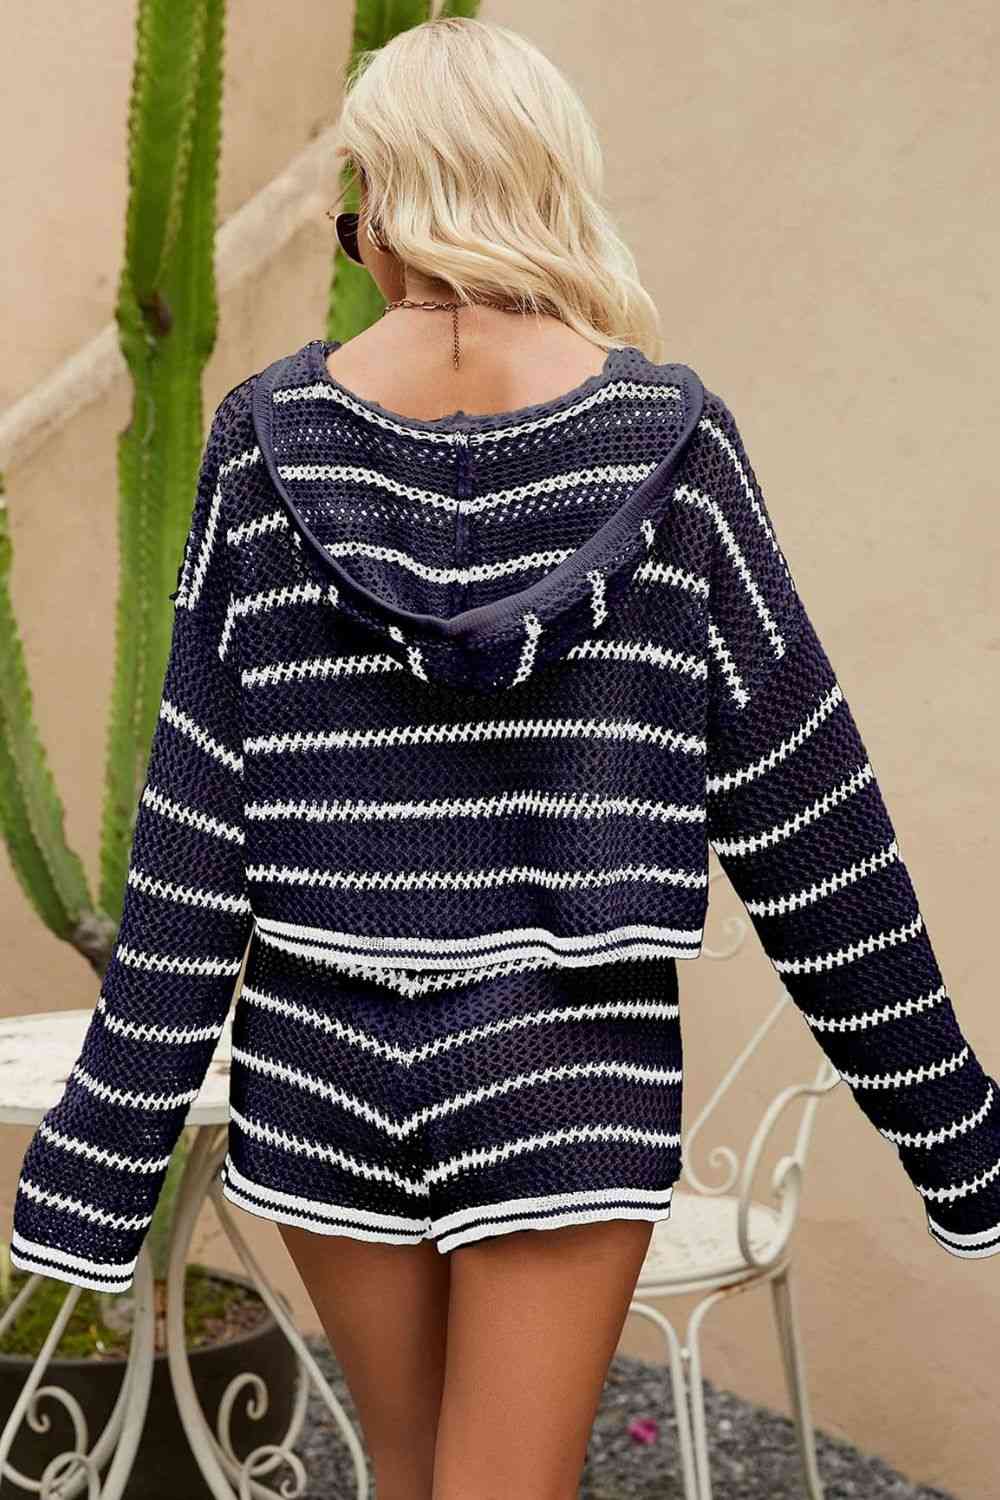 Striped Openwork Knit Hoodie and Shorts Set in Size S, M, L, or XL